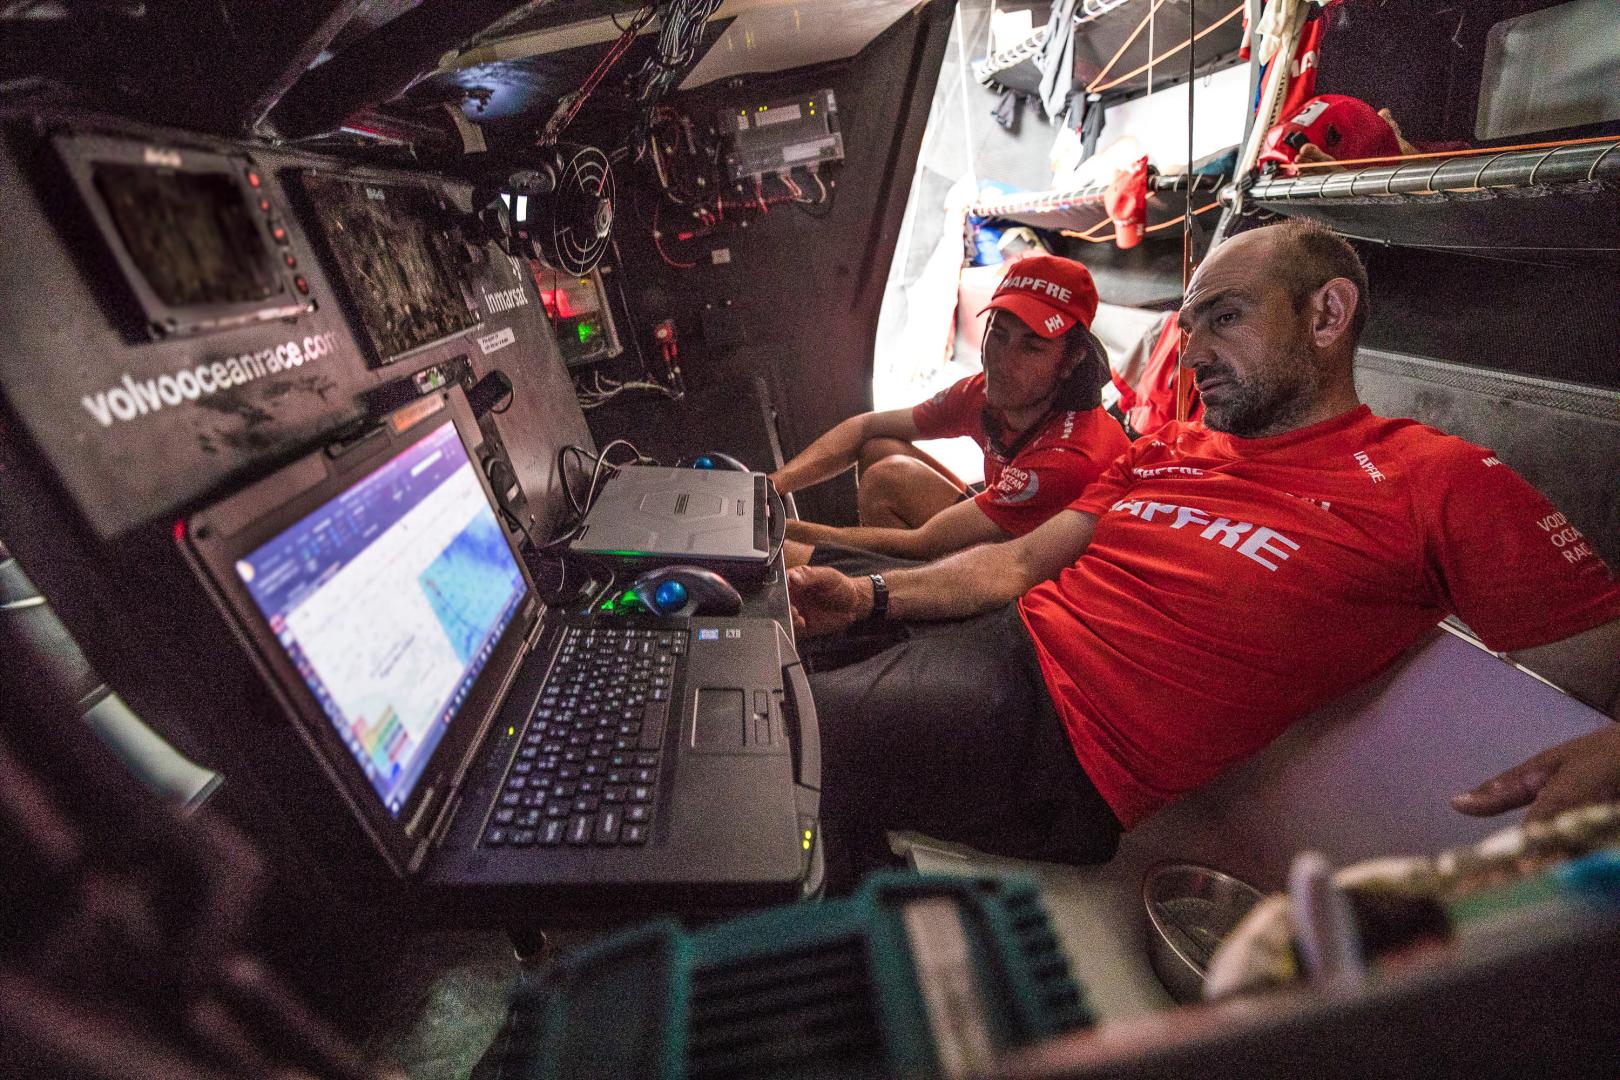 Premium technology on the Volvo Ocean 65 yachts enables world class connectivity of the Volvo Ocean Race fleet